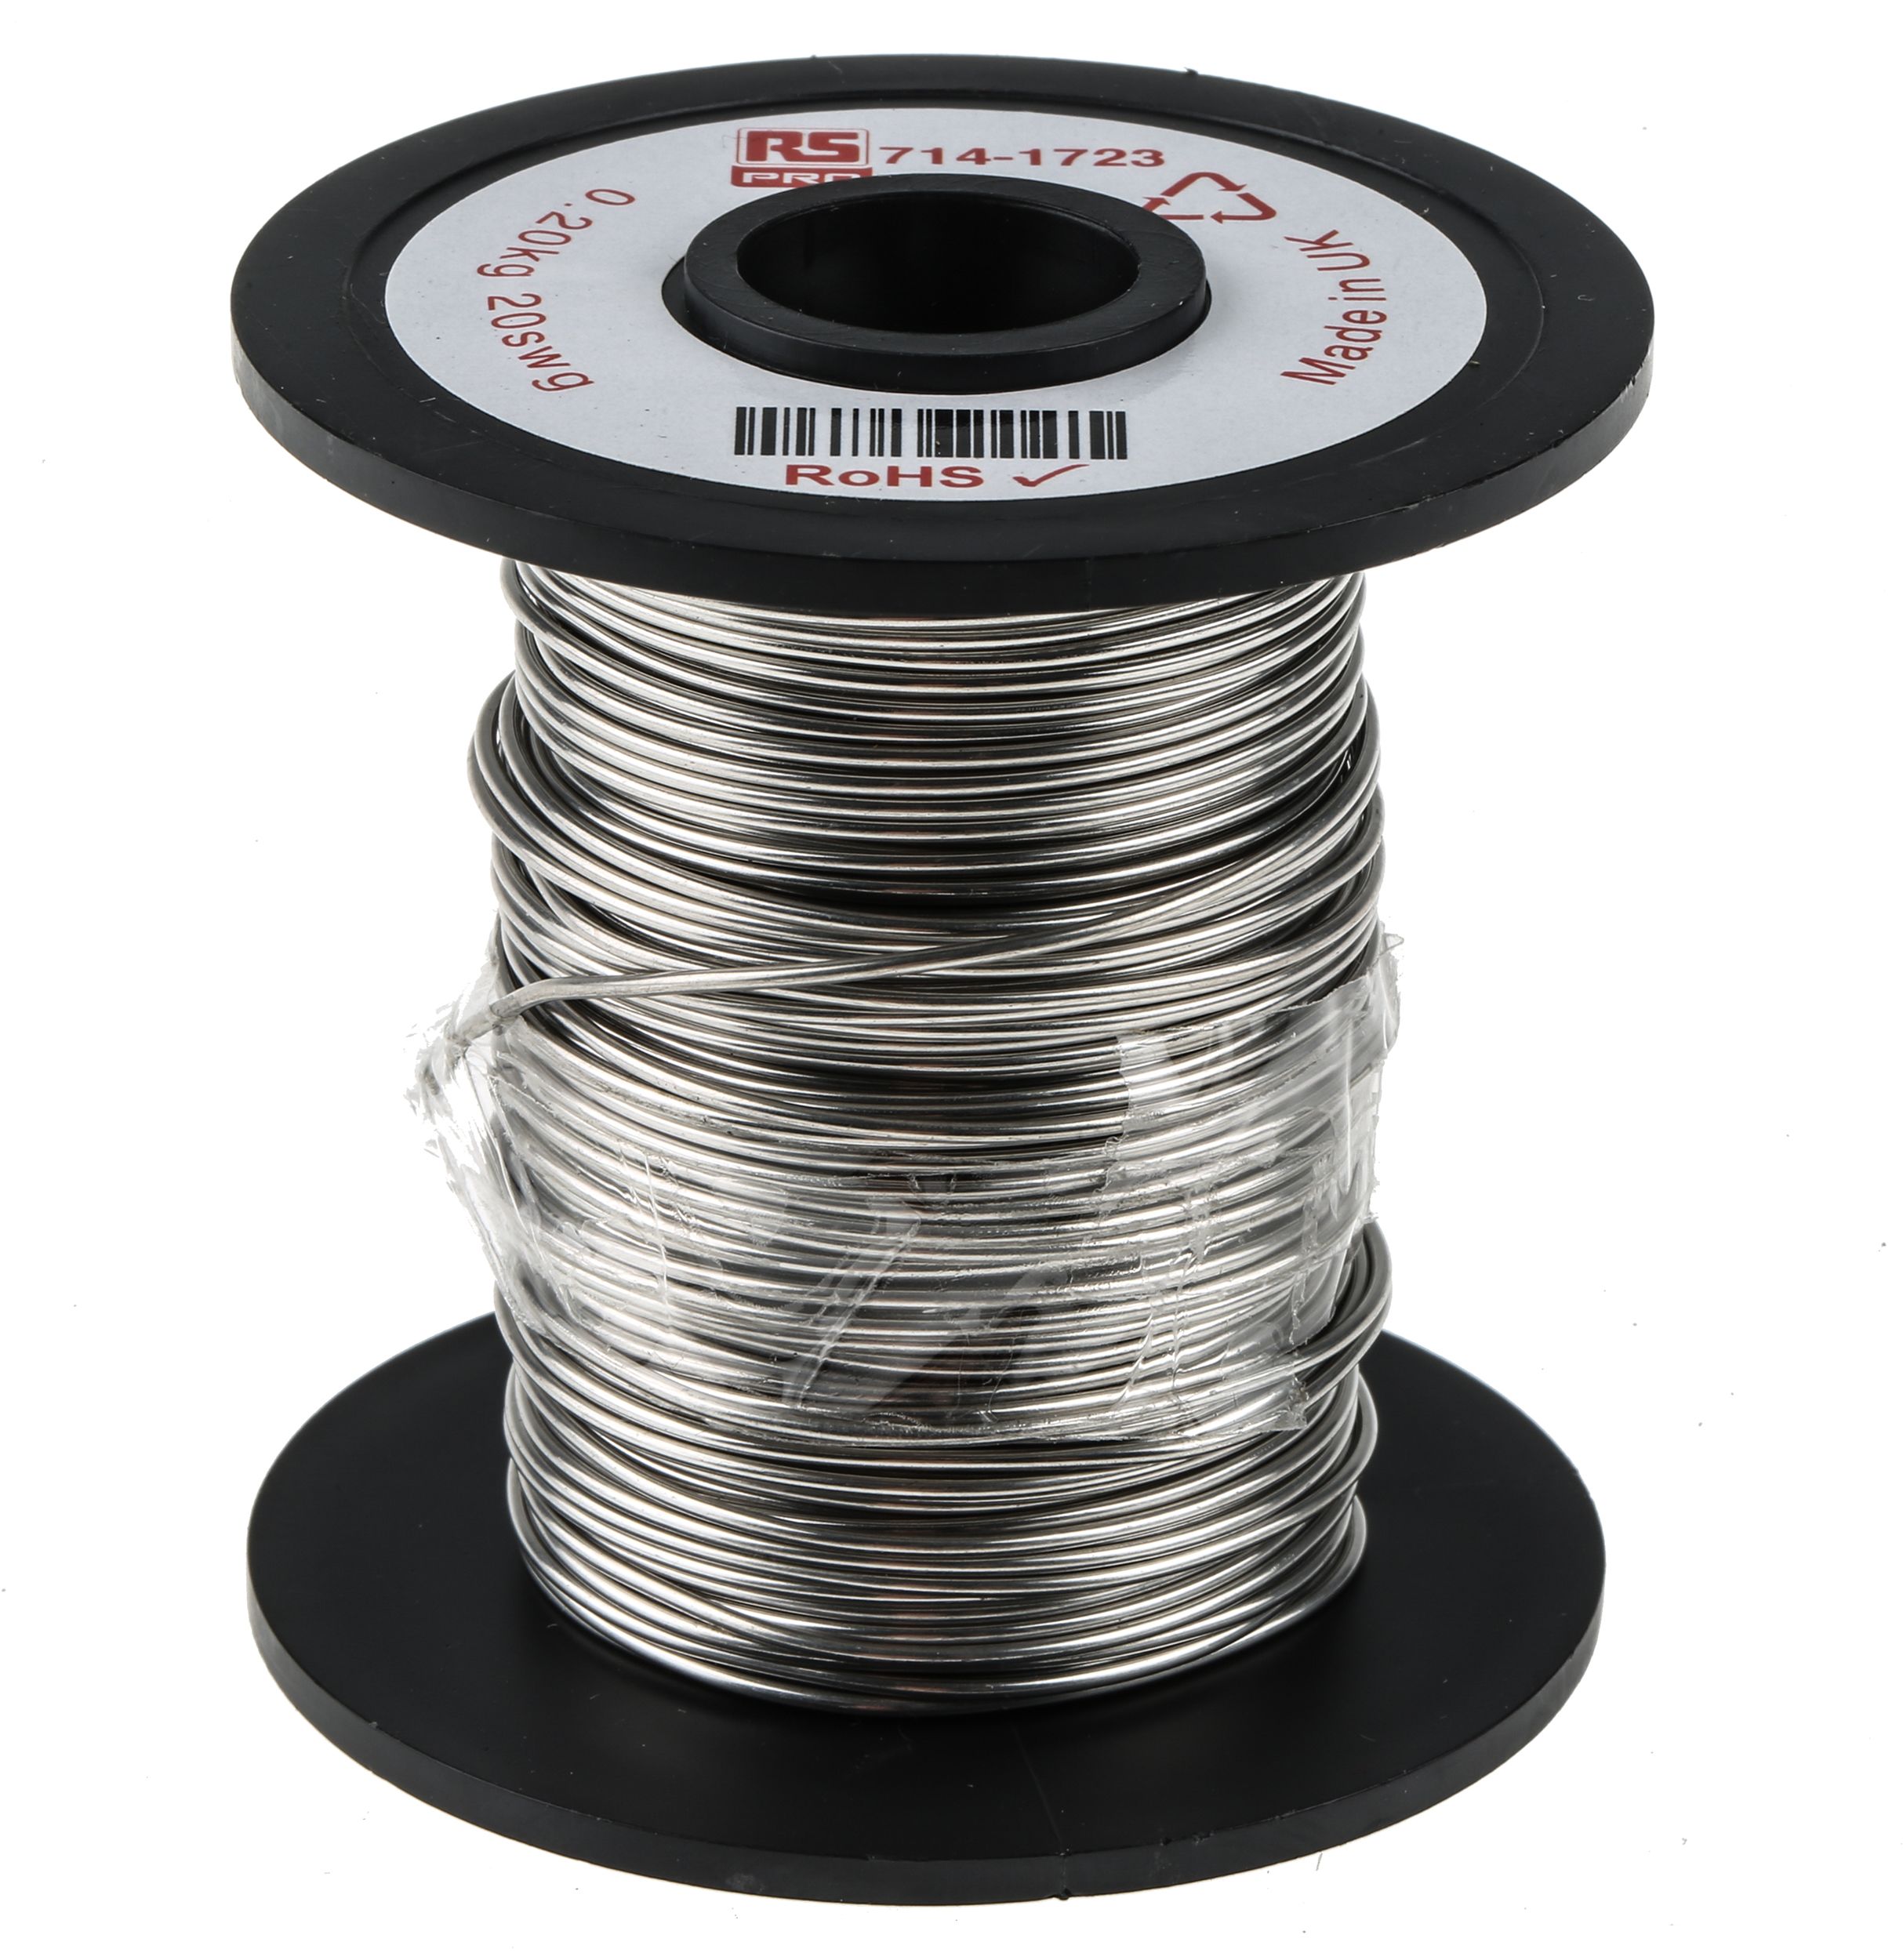 RS PRO Resistance Wire, 36m